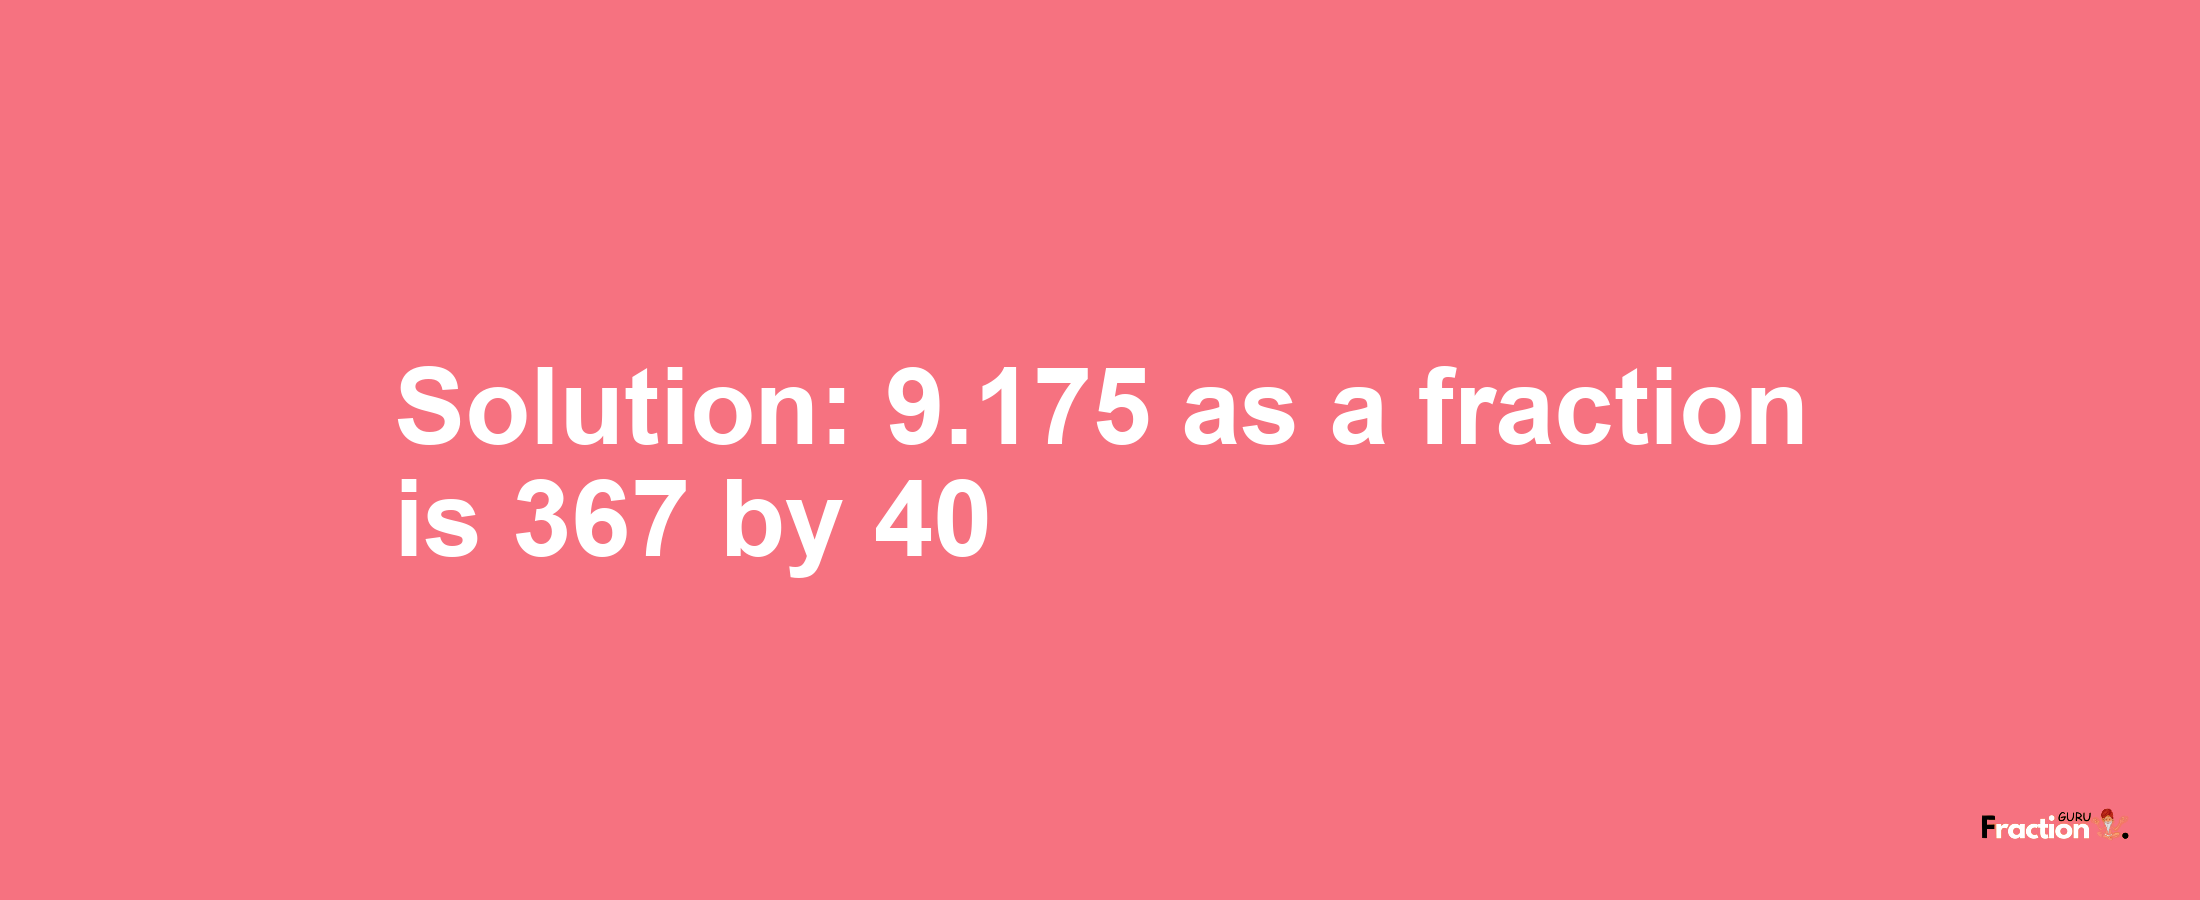 Solution:9.175 as a fraction is 367/40